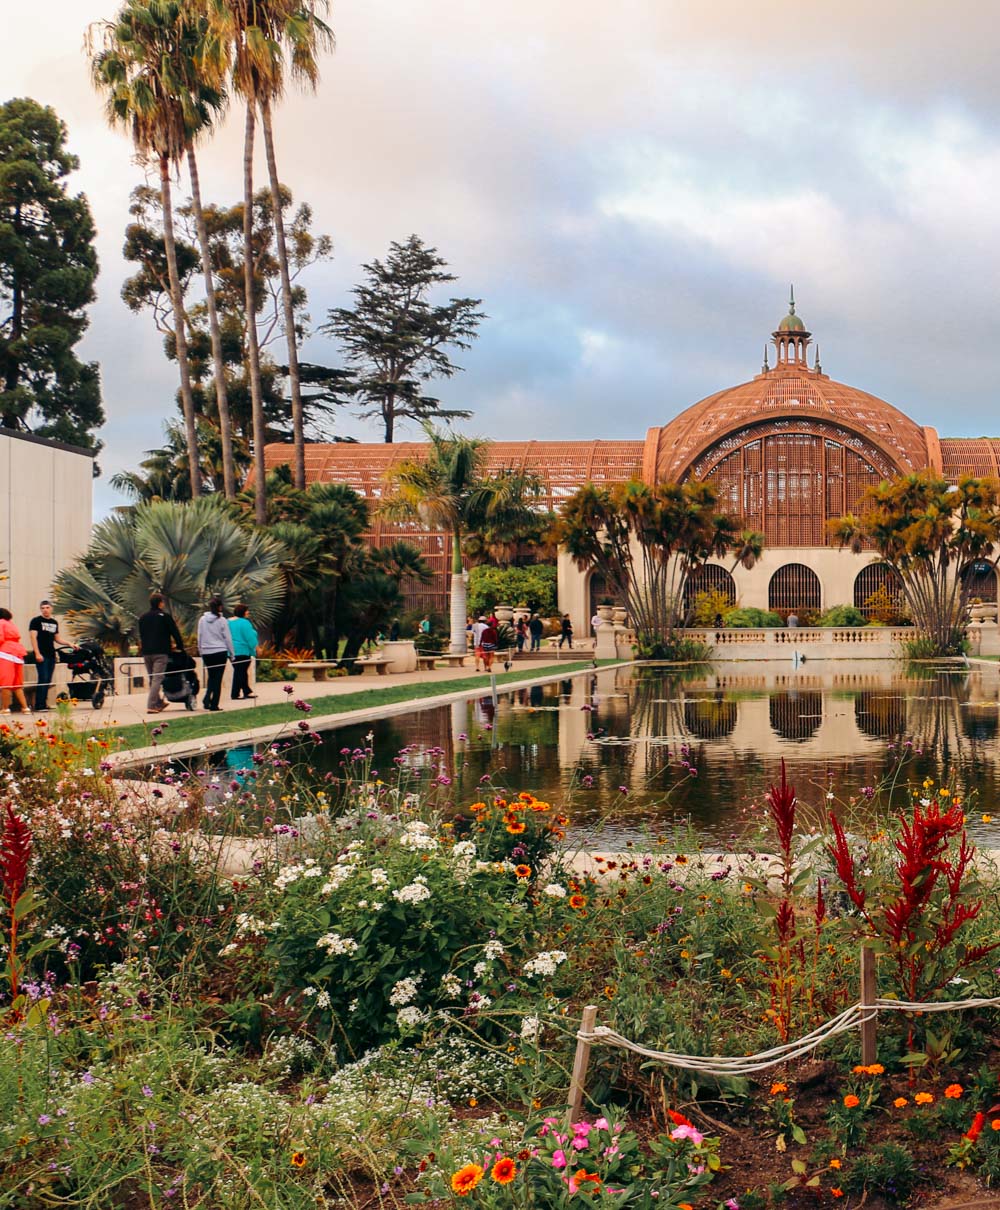 Things to Do in Balboa Park. Bucket List and Photography - Roads and Destinations